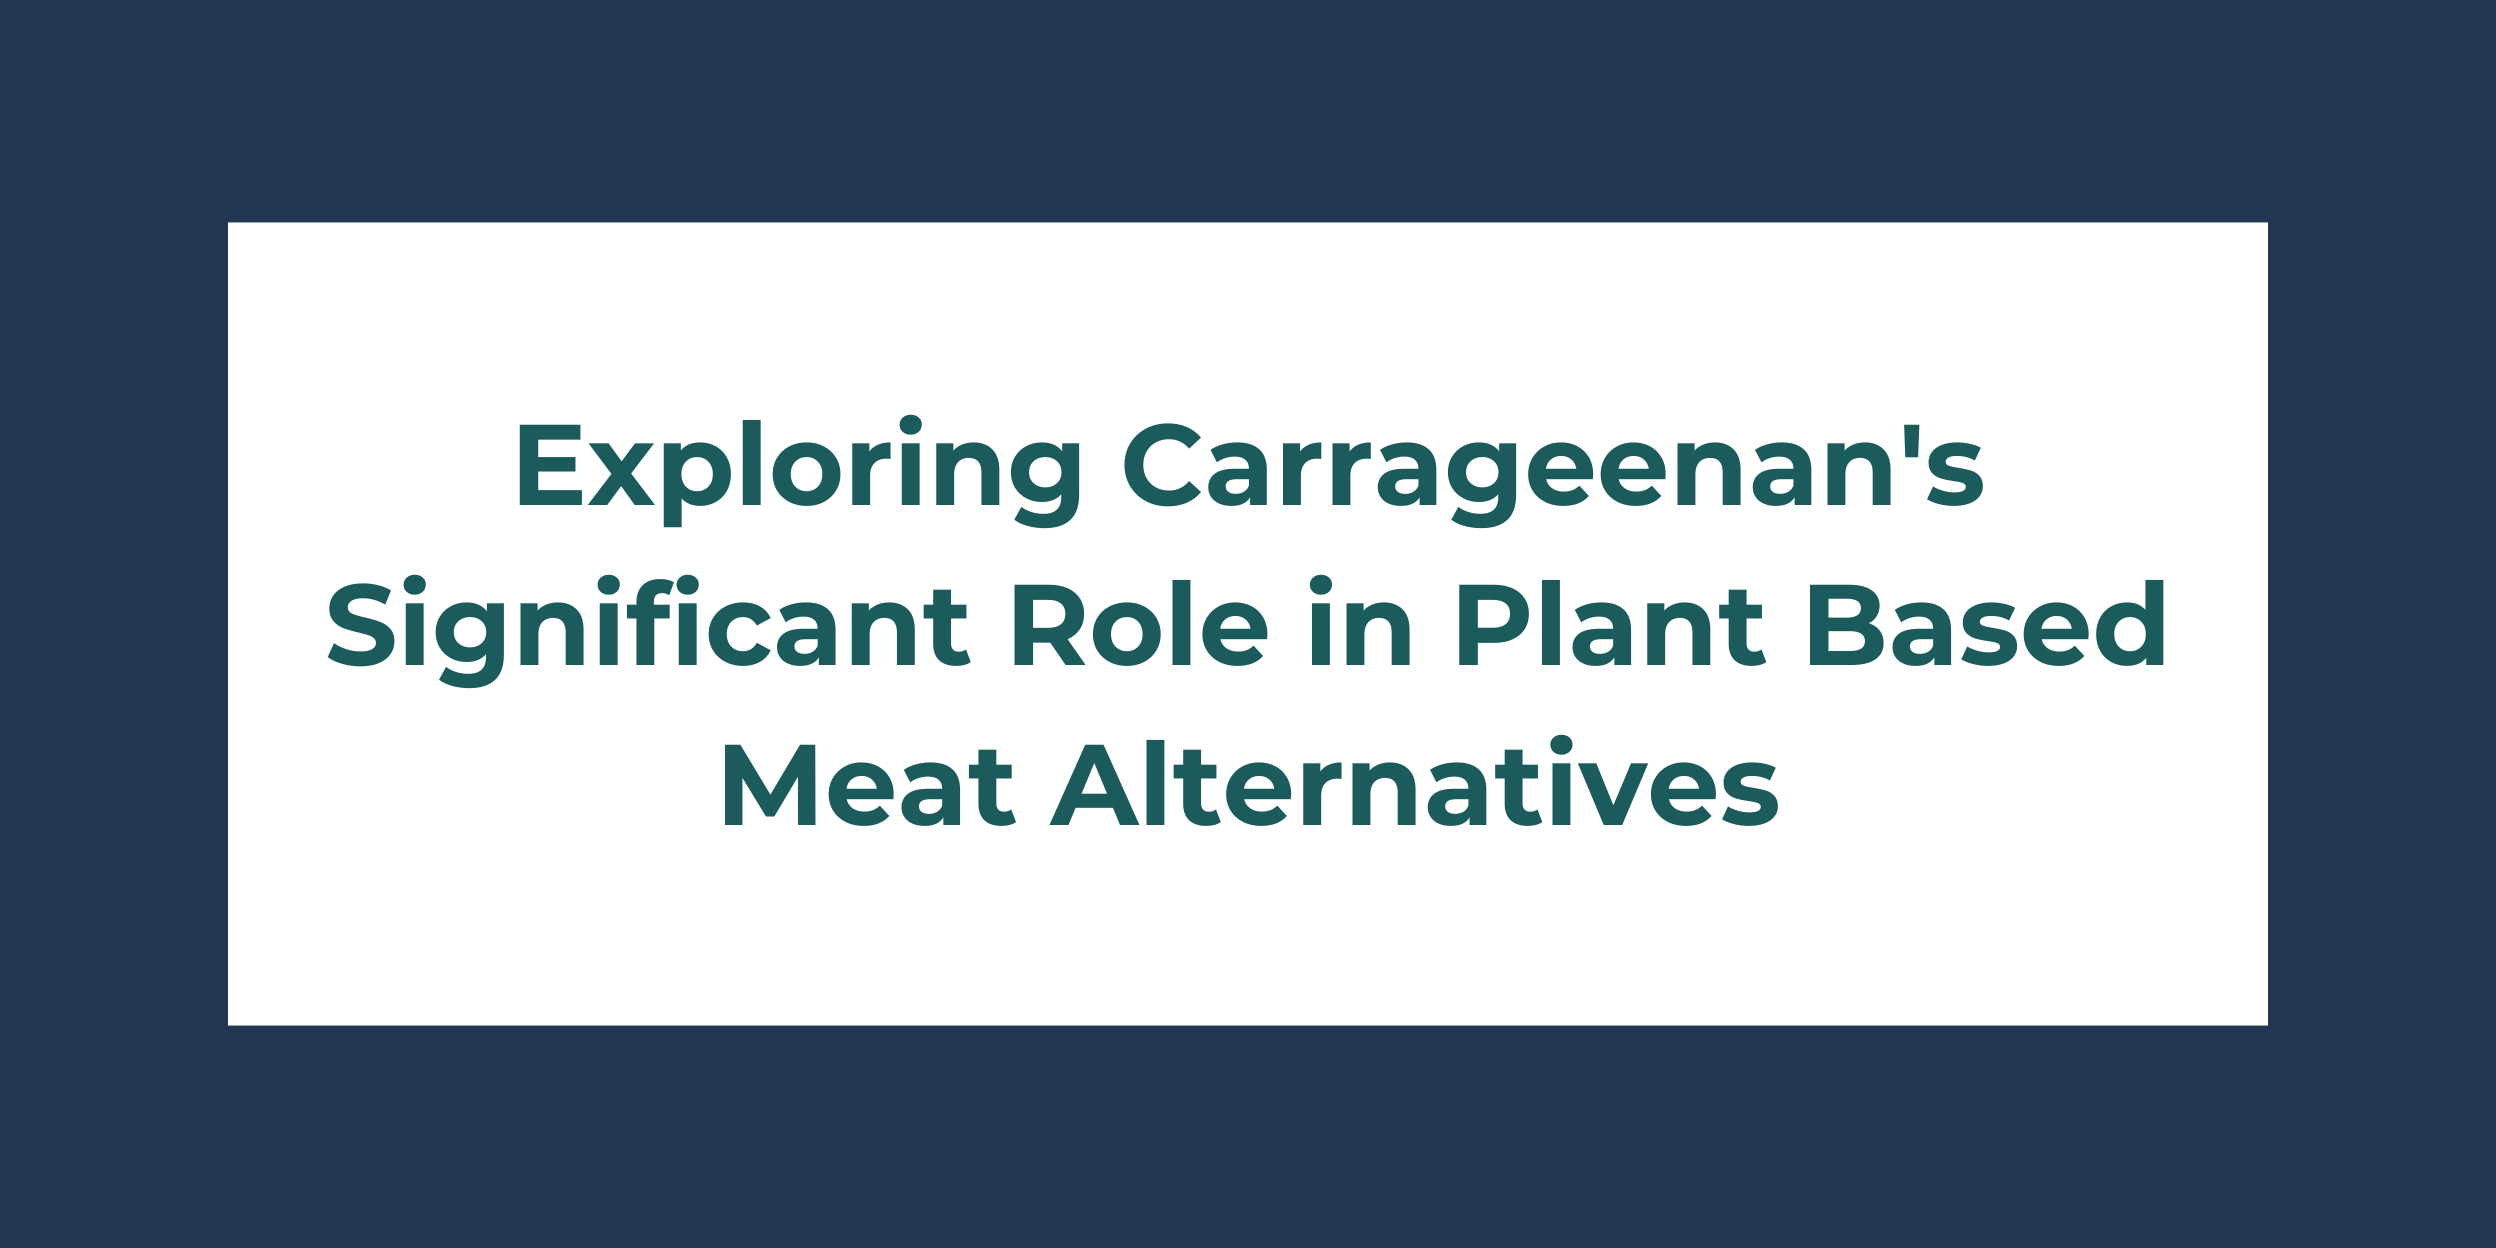 Exploring Carrageenan's Significant Role in Plant Based Meat Alternatives